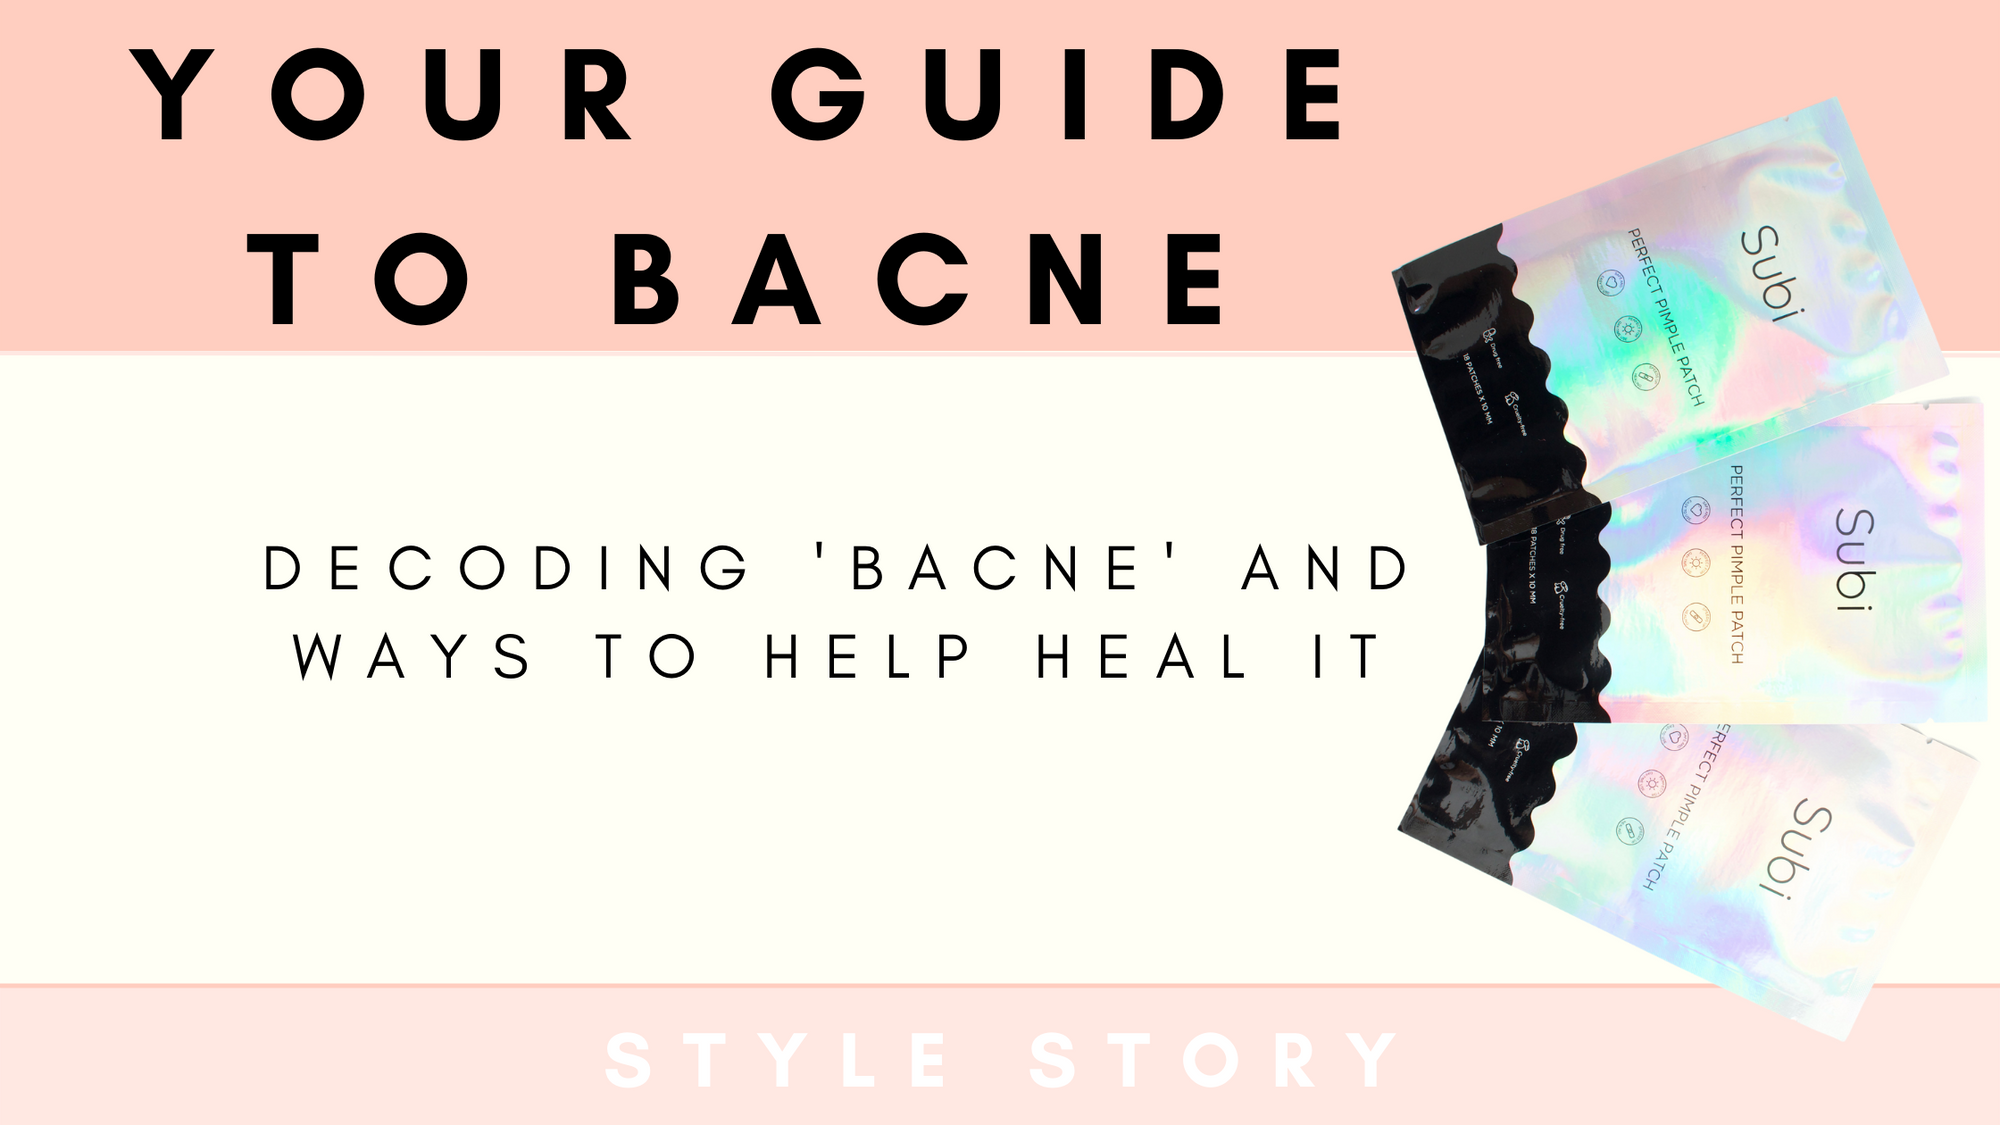 Your Guide To Bacne